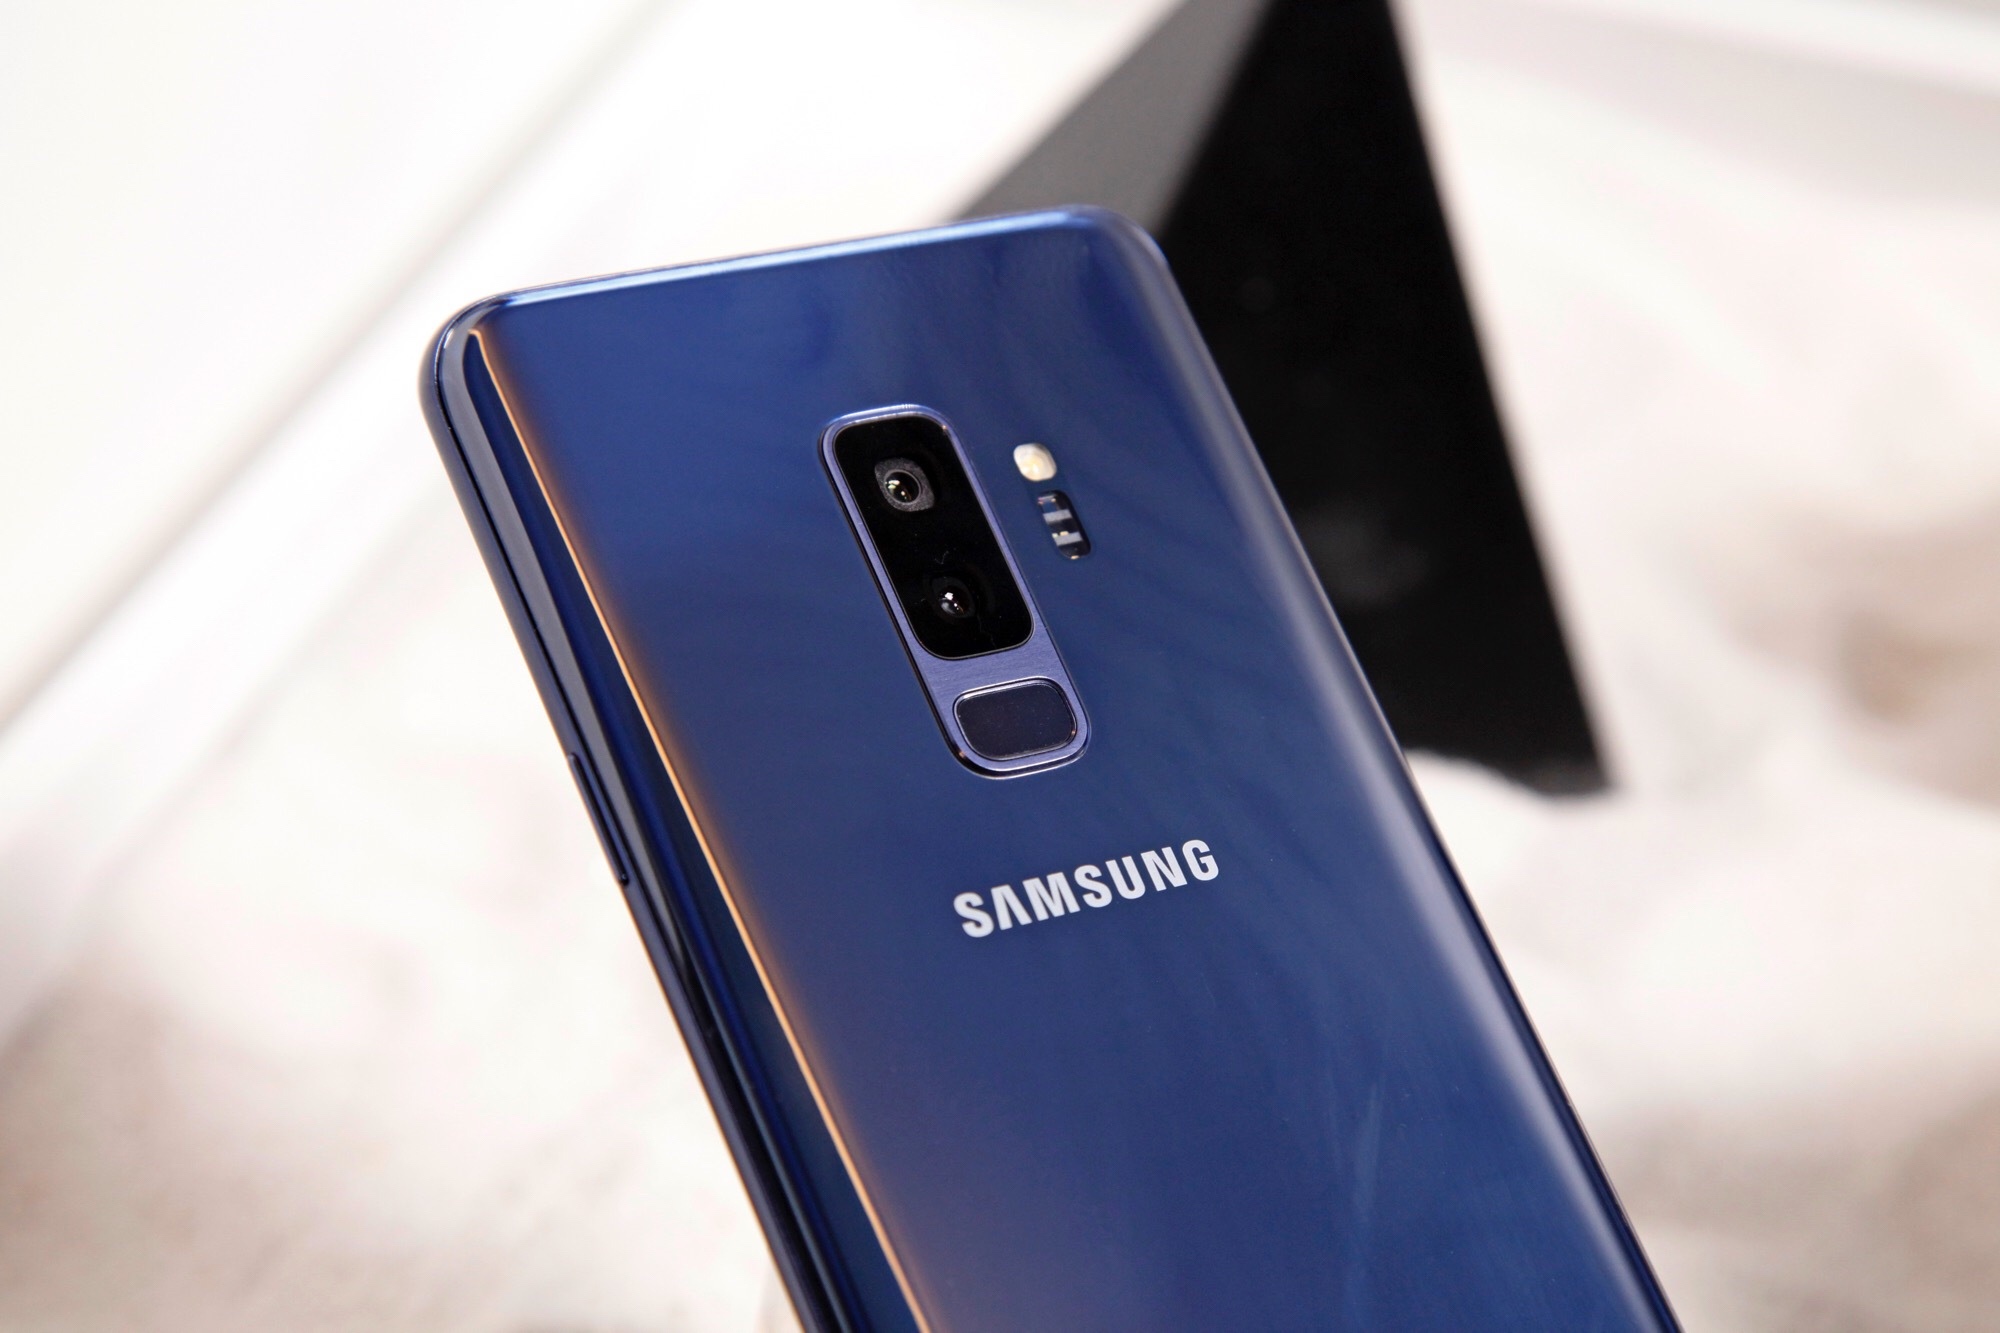 Samsung Galaxy S9 and S9+ cost on AT&T, T-Mobile, and Verizon